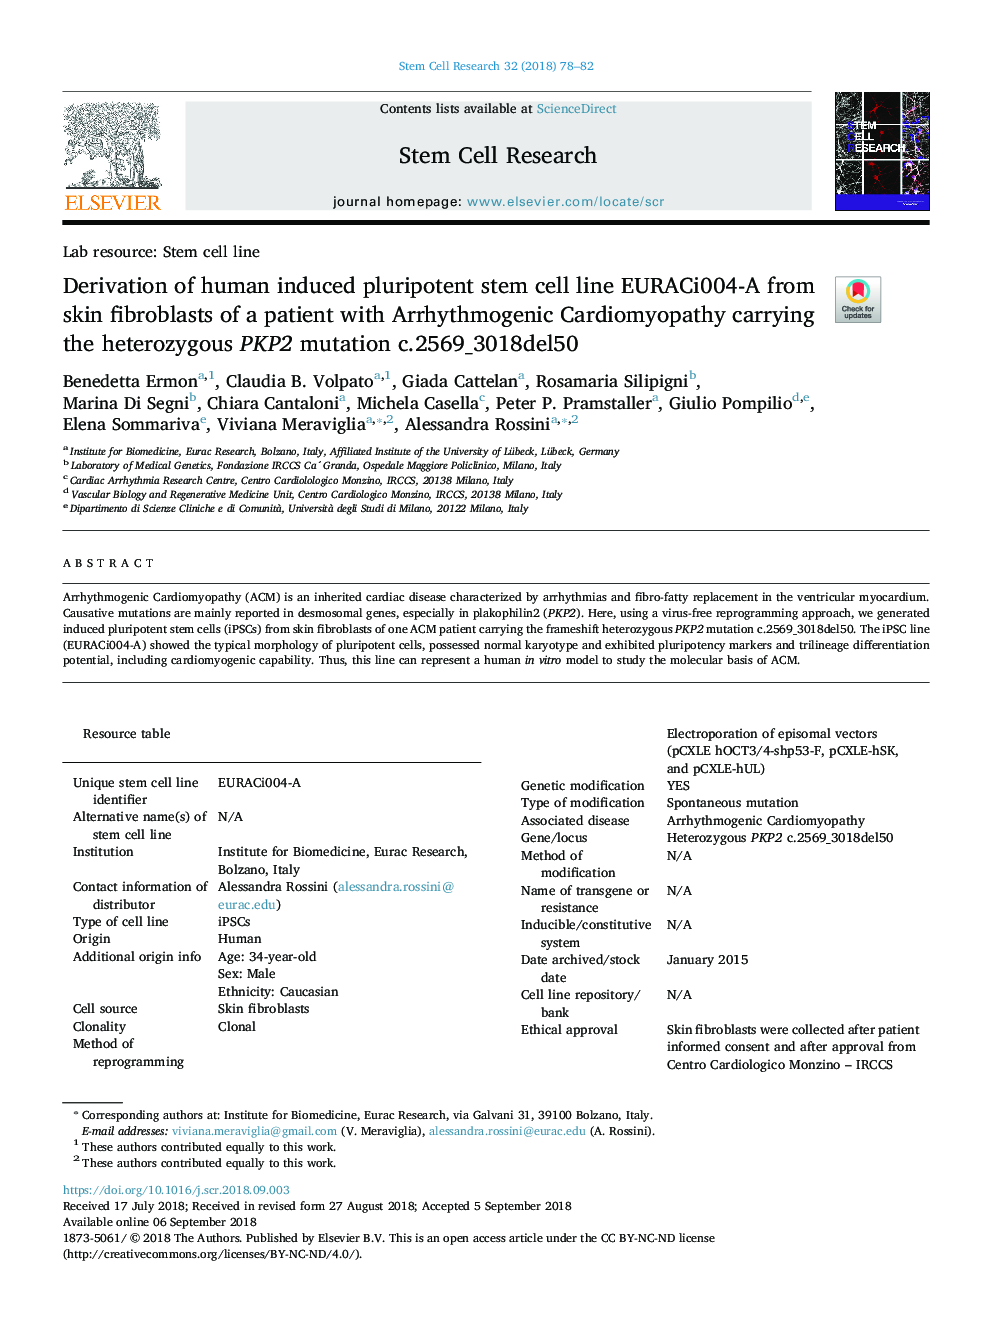 Derivation of human induced pluripotent stem cell line EURACi004-A from skin fibroblasts of a patient with Arrhythmogenic Cardiomyopathy carrying the heterozygous PKP2 mutation c.2569_3018del50